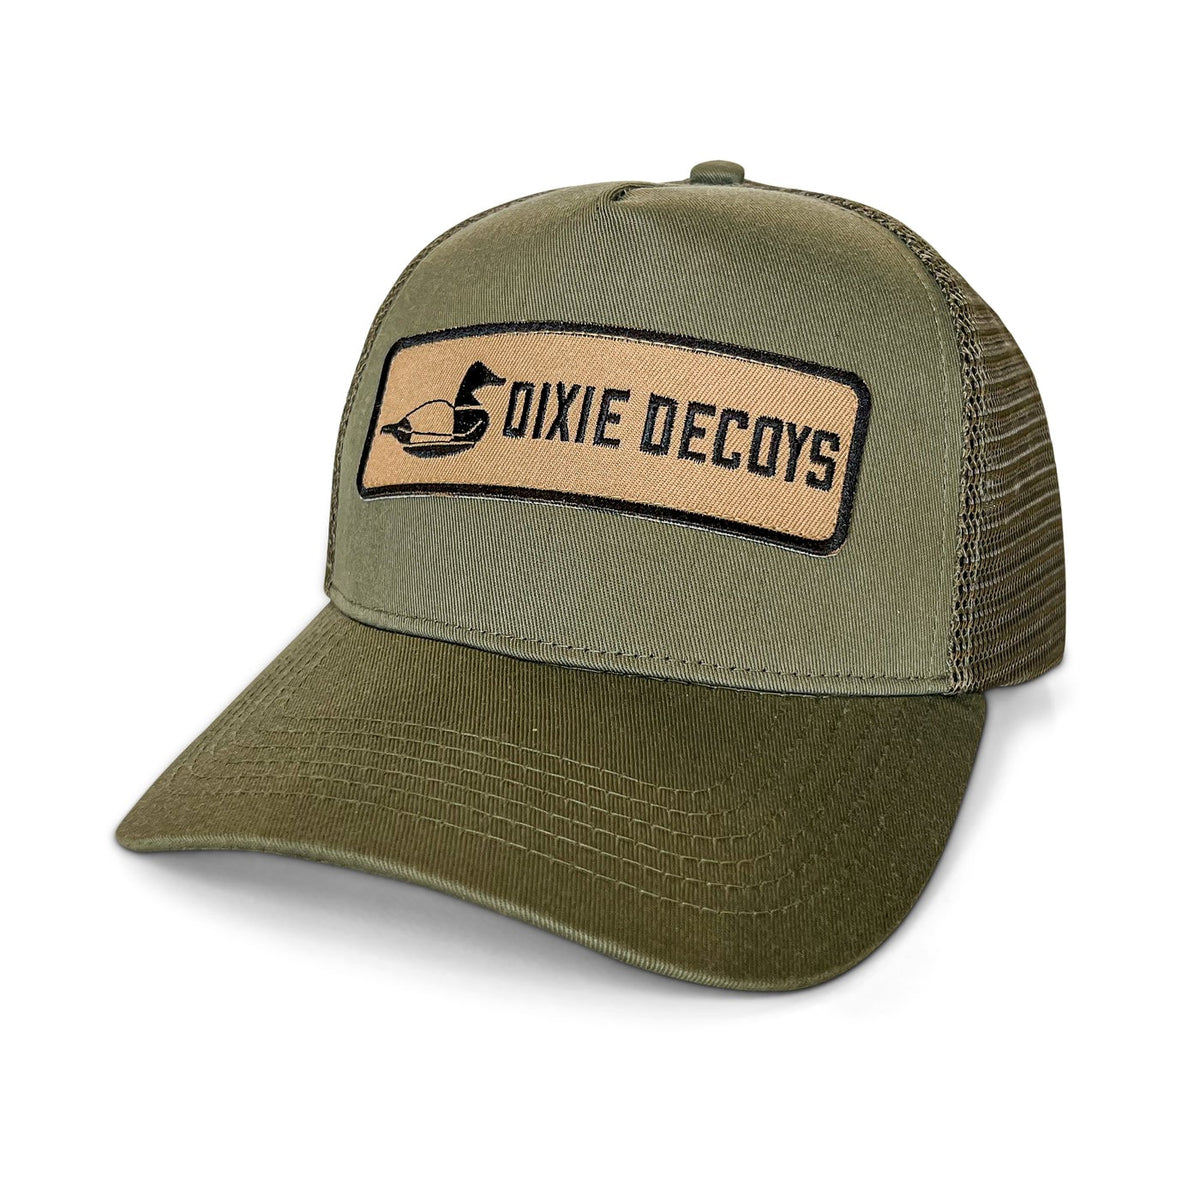 Dixie Decoys- Low Country Green